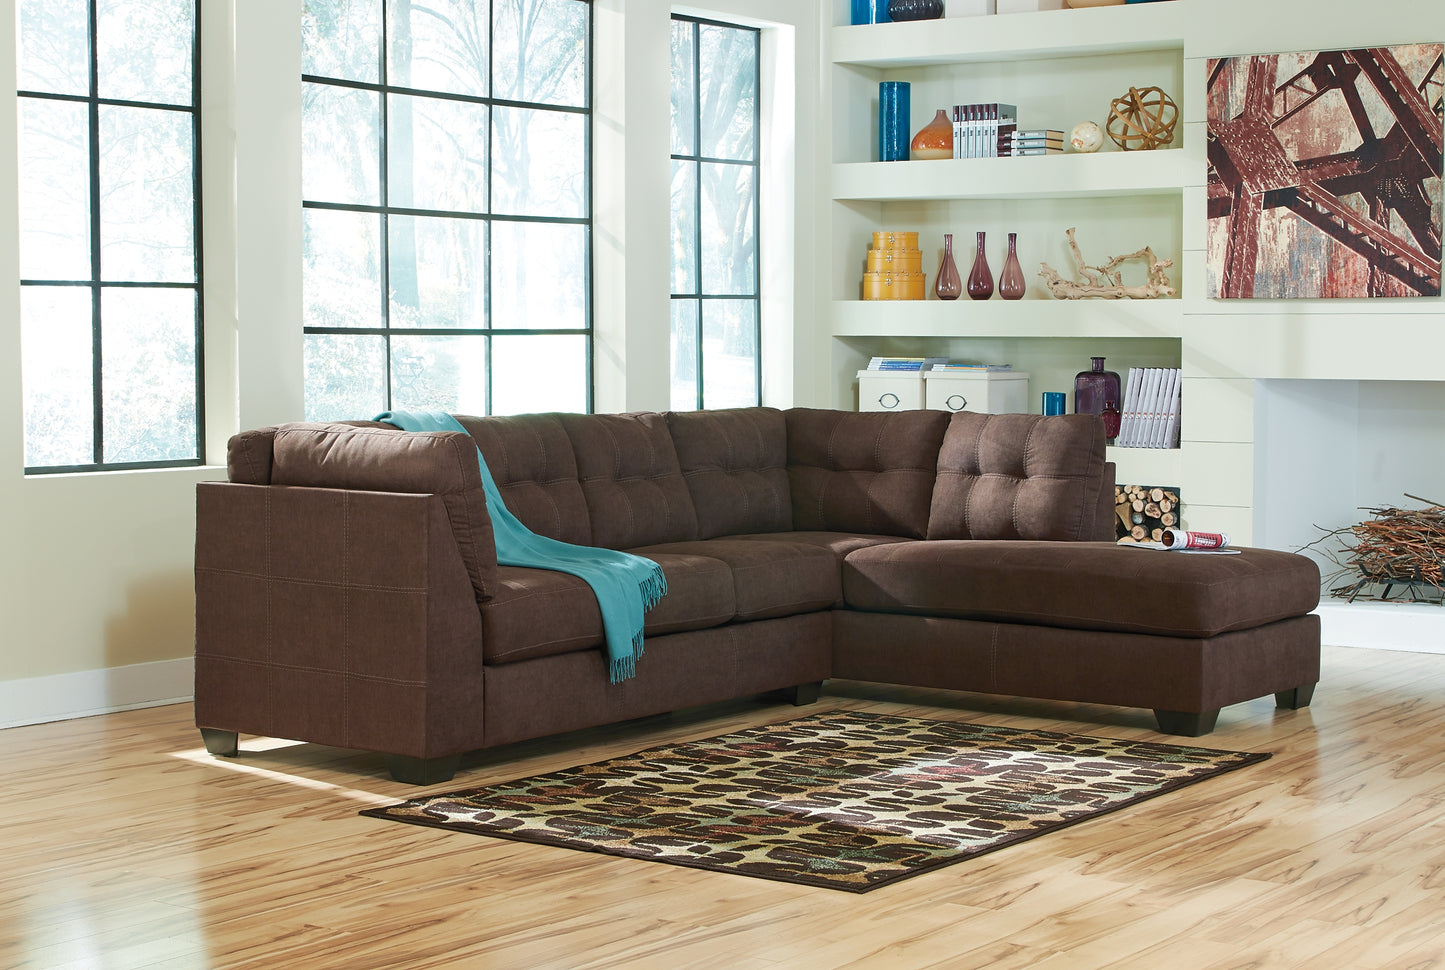 Maier 2-Piece Sectional with Chaise Wilson Furniture (OH)  in Bridgeport, Ohio. Serving Bridgeport, Yorkville, Bellaire, & Avondale